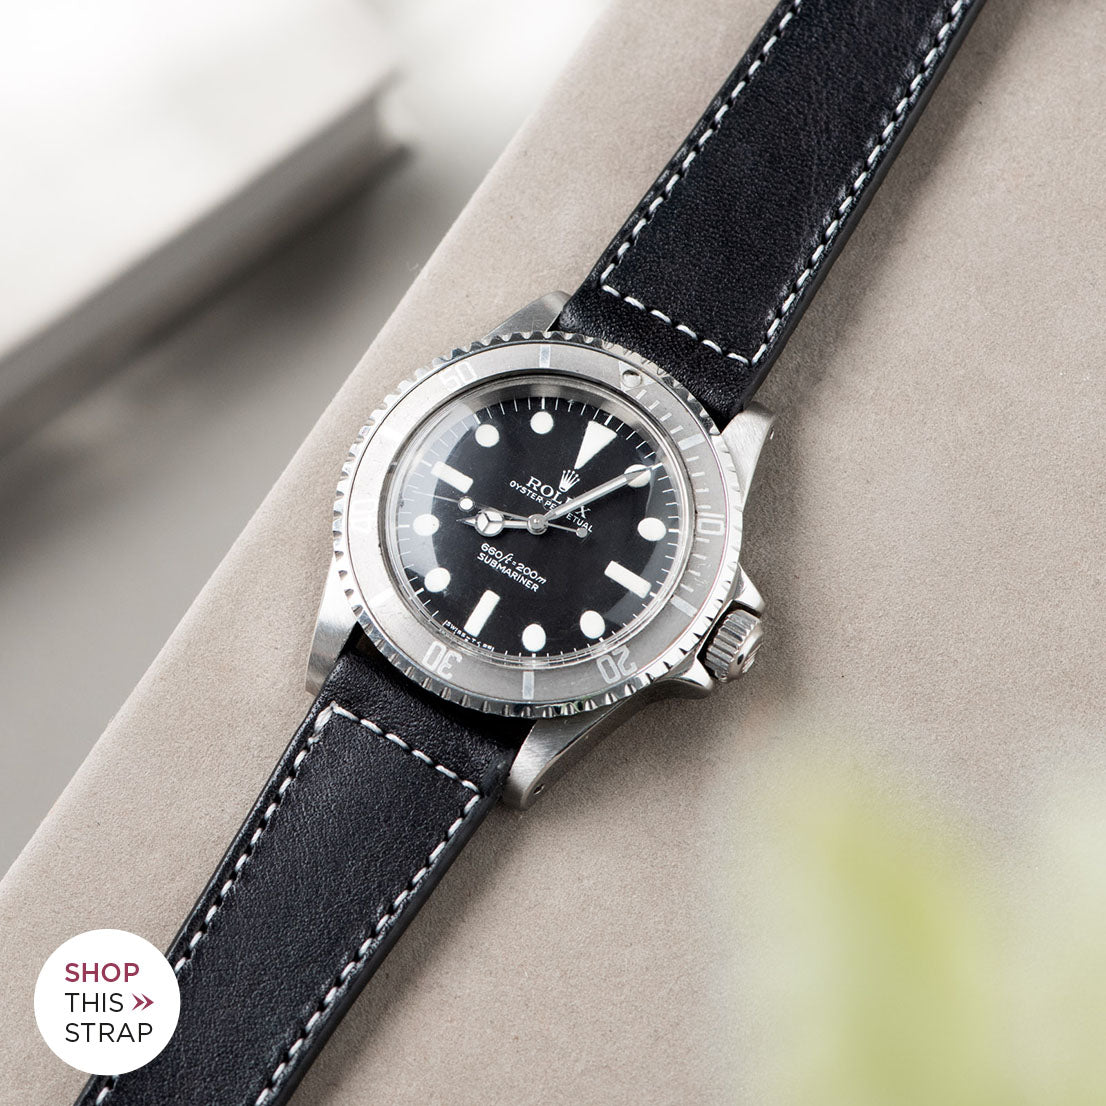 Bulang and Sons_Strap Guide_The Rolex 5513 Faded Maxi Submariner_Black Boxed Stitch Leather Watch Strap